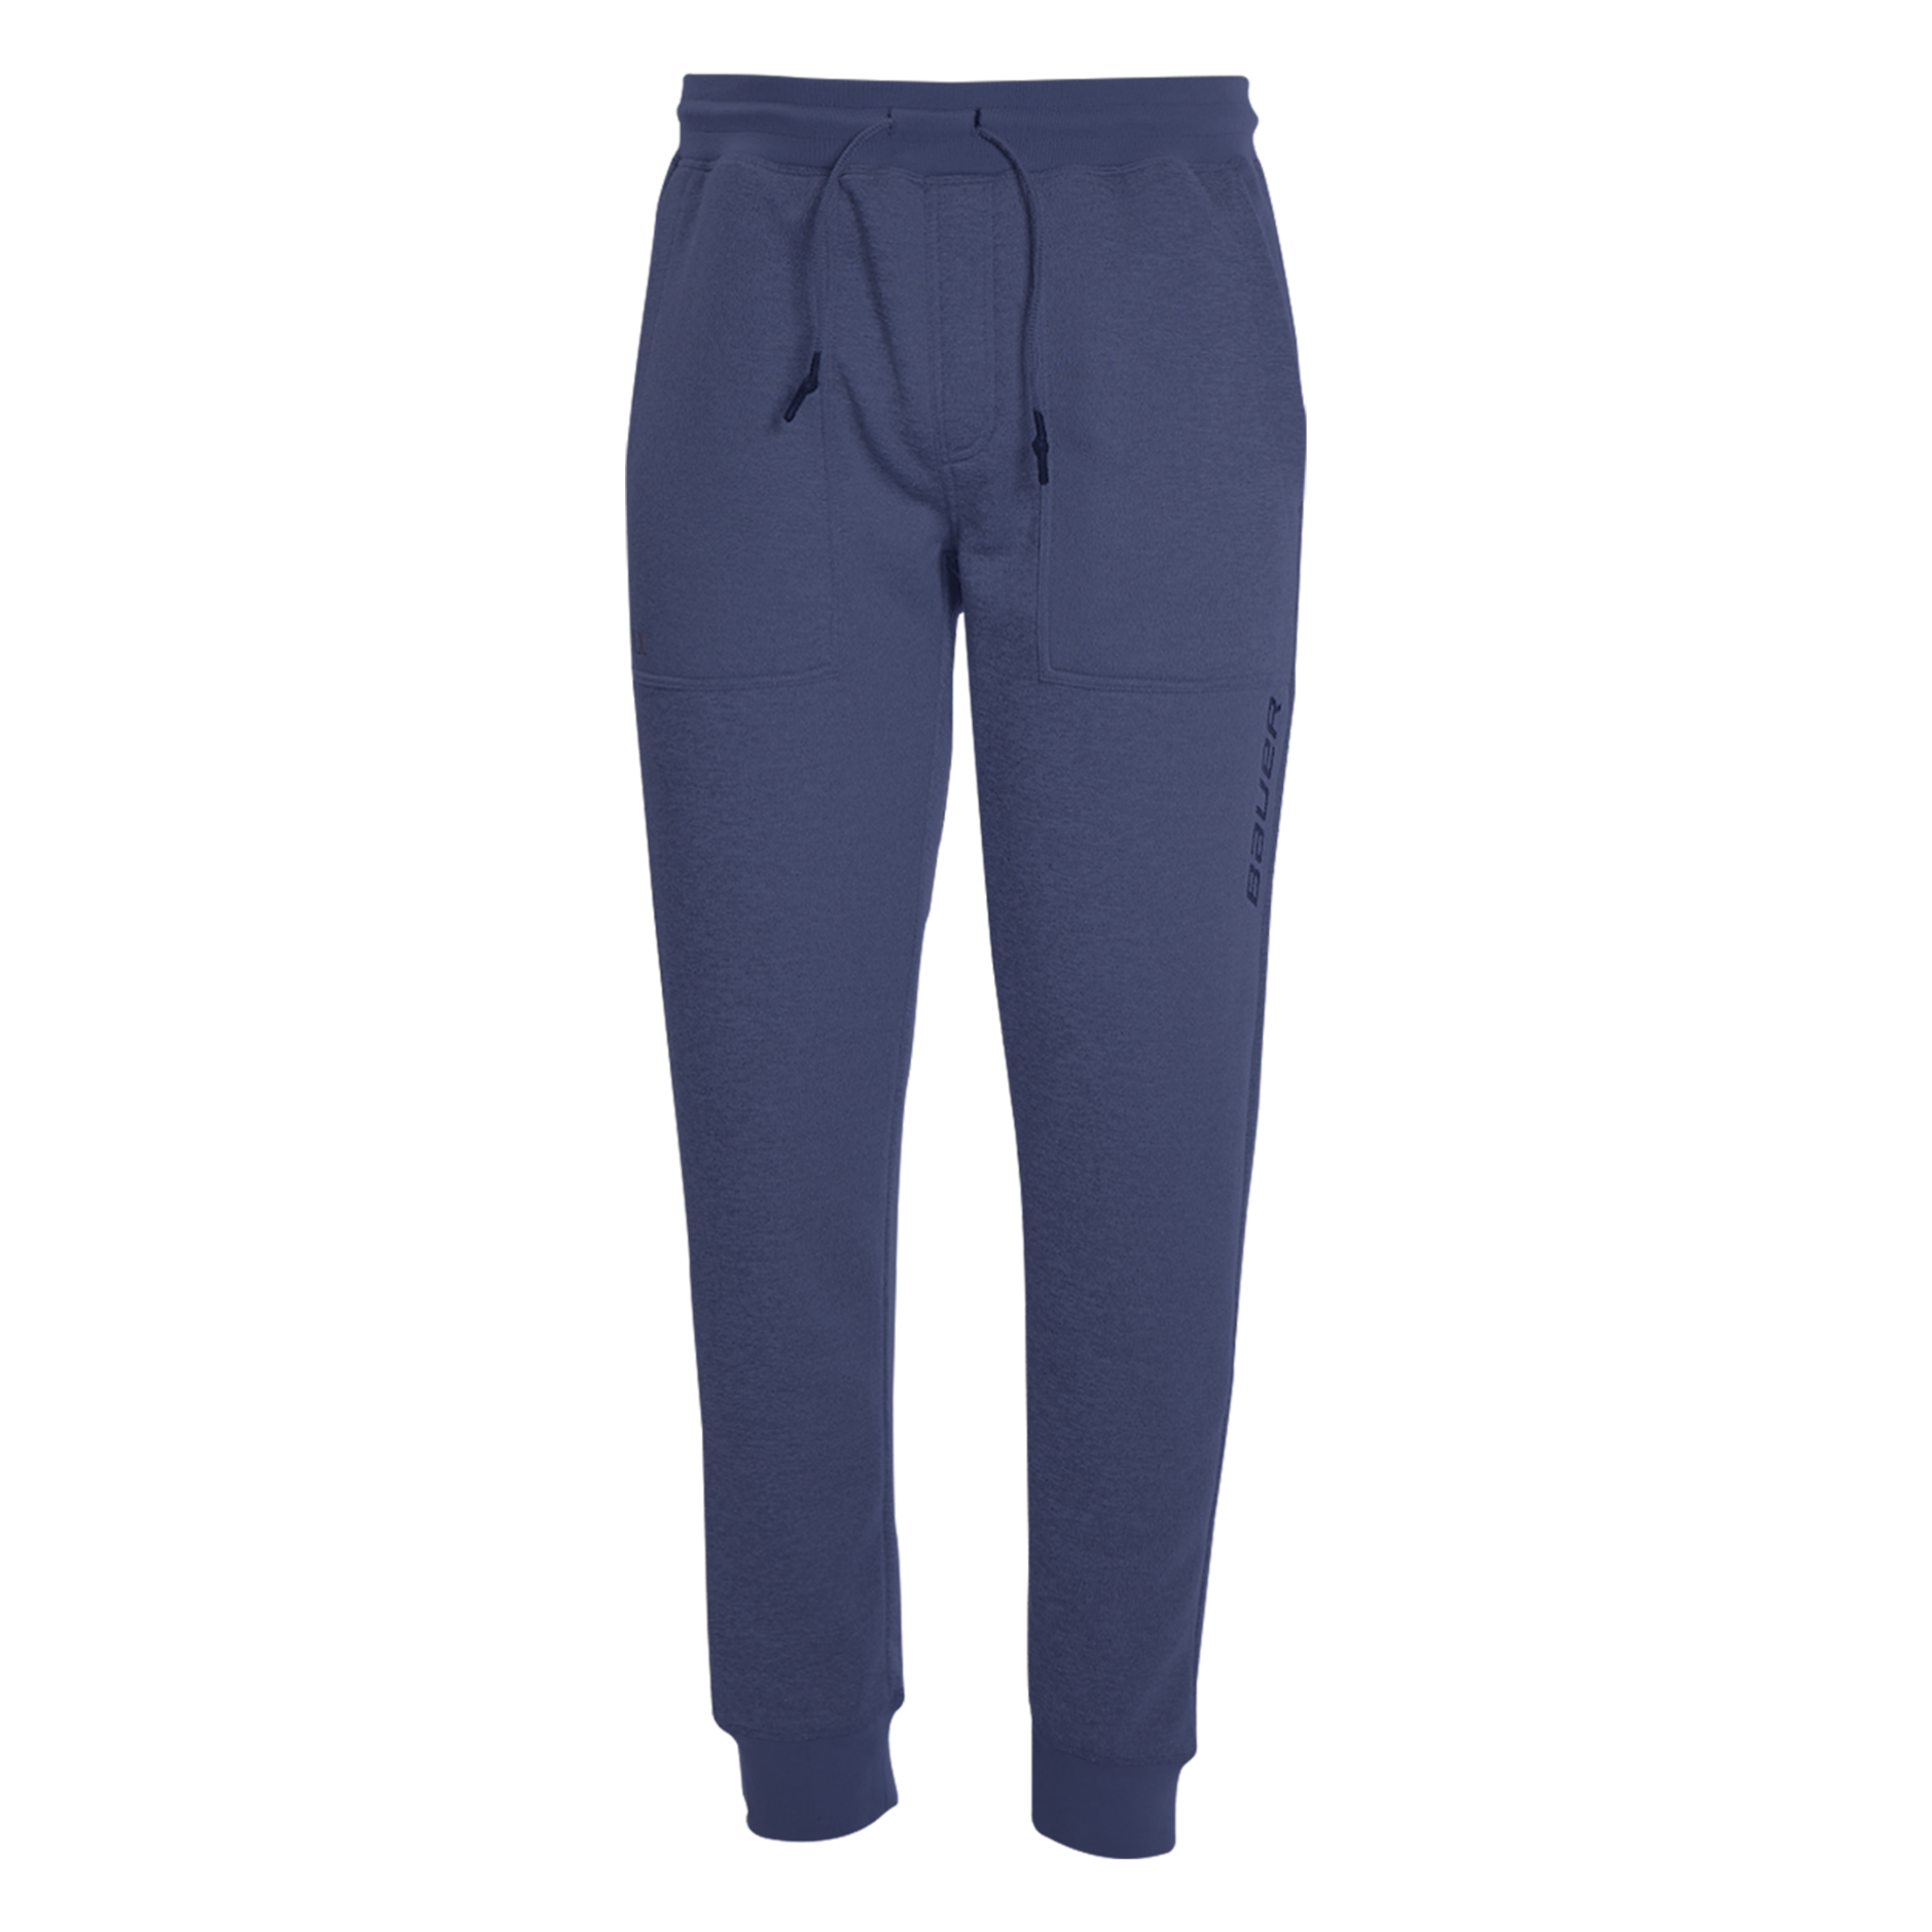 Bauer Fleece Warmth Knit Jogger Adult –